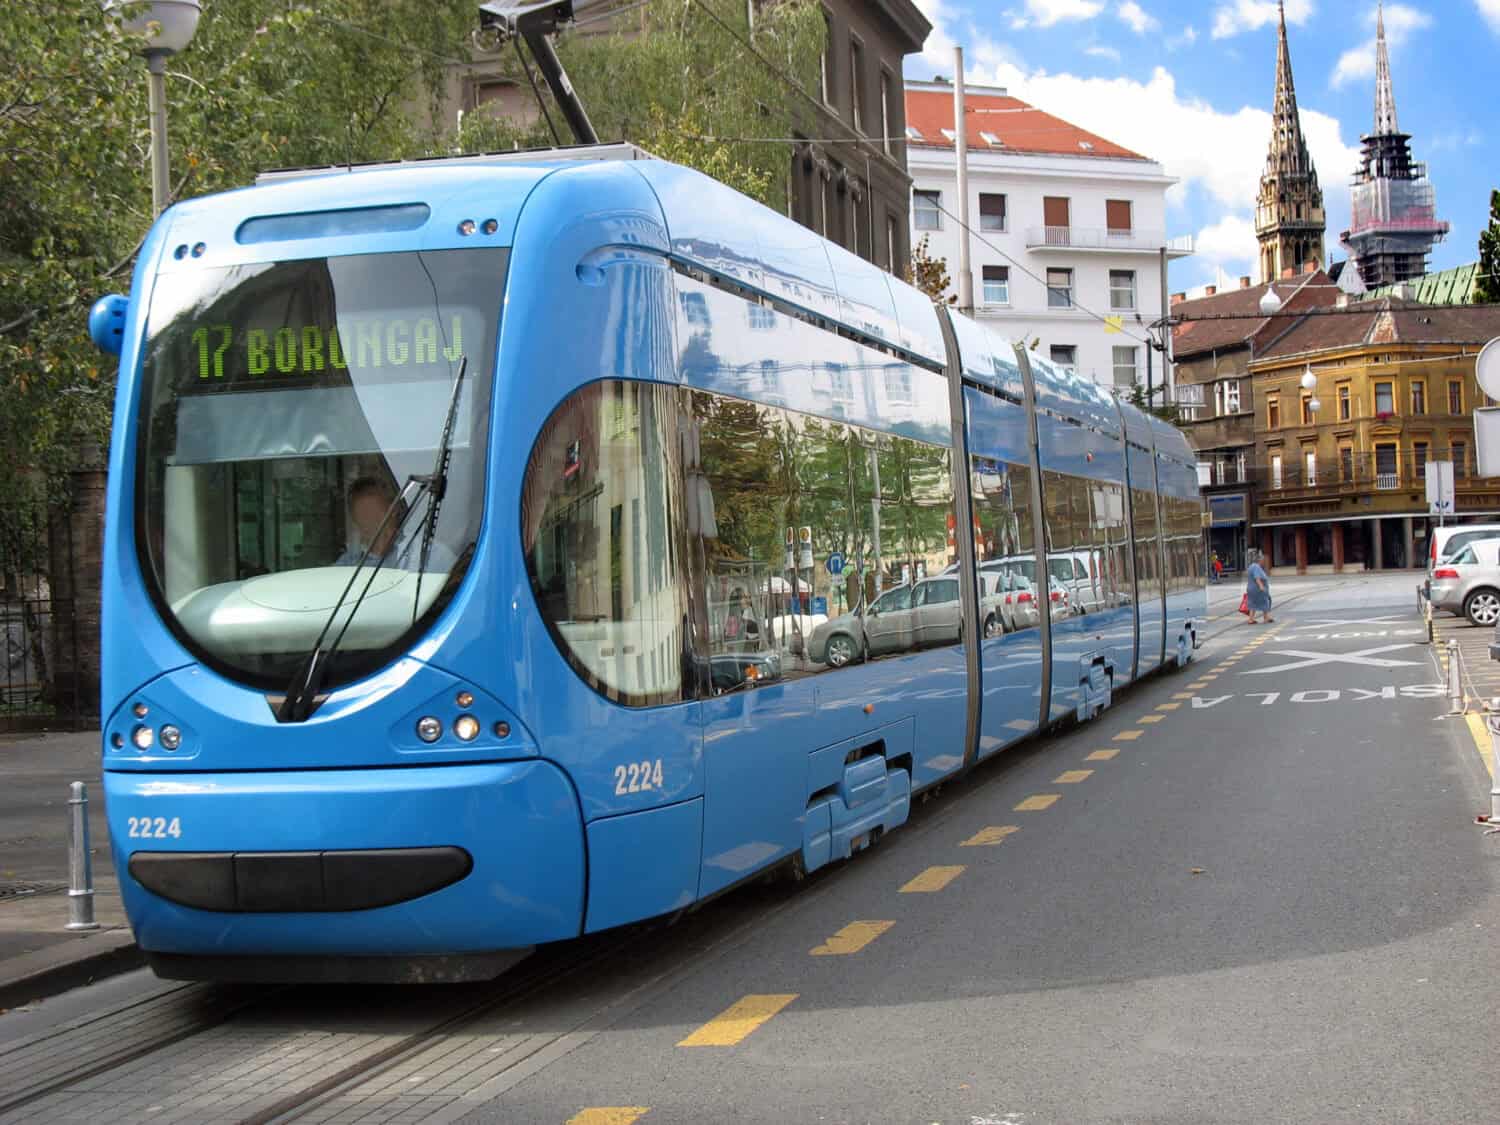 <ul> <li><strong>Sample Cost:</strong> $0.58 to $10.00 per person (Bus or Tram)</li> </ul> <p>If you see Croatia the way its residents do, you should focus on public transportation around Zagreb. If you want to go outside the area, then it's rental car time. However, if you're focused on seeing the city first, there are many trams, buses, and trains available. If there is one caveat, unlike Tokyo where trains run on an incredibly efficient schedule, Croatian trains are less timely. Up to 15 tram lines run from 4 am to midnight and four run from midnight to 4 am, so just keep an eye on timing.</p> <p>As far as cost, you can expect to pay less if you buy in advance for a limited amount of time on the train:</p> <ul> <li>30 Minutes: $0.58</li> <li>60 Minutes: $1.01</li> <li>90 Minutes: $1.45</li> </ul> <p>If you want to make a purchase on a bus or tram for ease of travel, you can do so, just expect to pay a tiny bit more:</p> <ul> <li>30 Minutes: $0.87</li> <li>60 Minutes: $1.45</li> <li>90 Minutes: $2.16</li> <li>24 Hours: $4.33</li> <li>72 Hours: $10.10</li> <li>Children under 7: free</li> </ul> <p>Agree with this? Hit the Thumbs Up button above. Disagree? Let us know in the comments with what you'd change.</p>